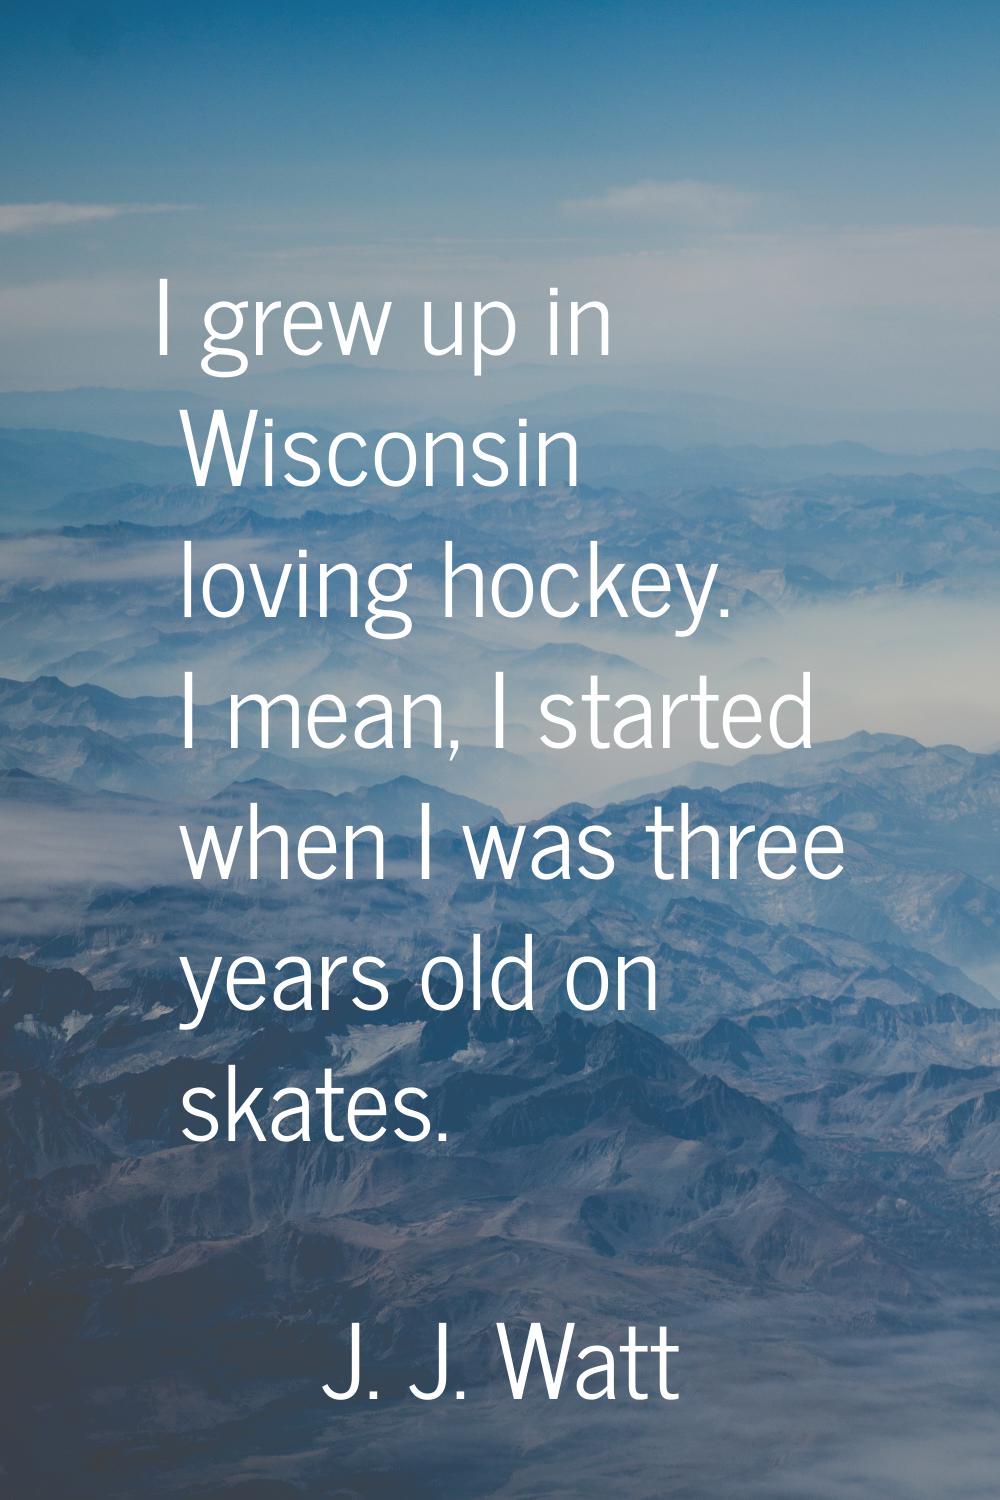 I grew up in Wisconsin loving hockey. I mean, I started when I was three years old on skates.